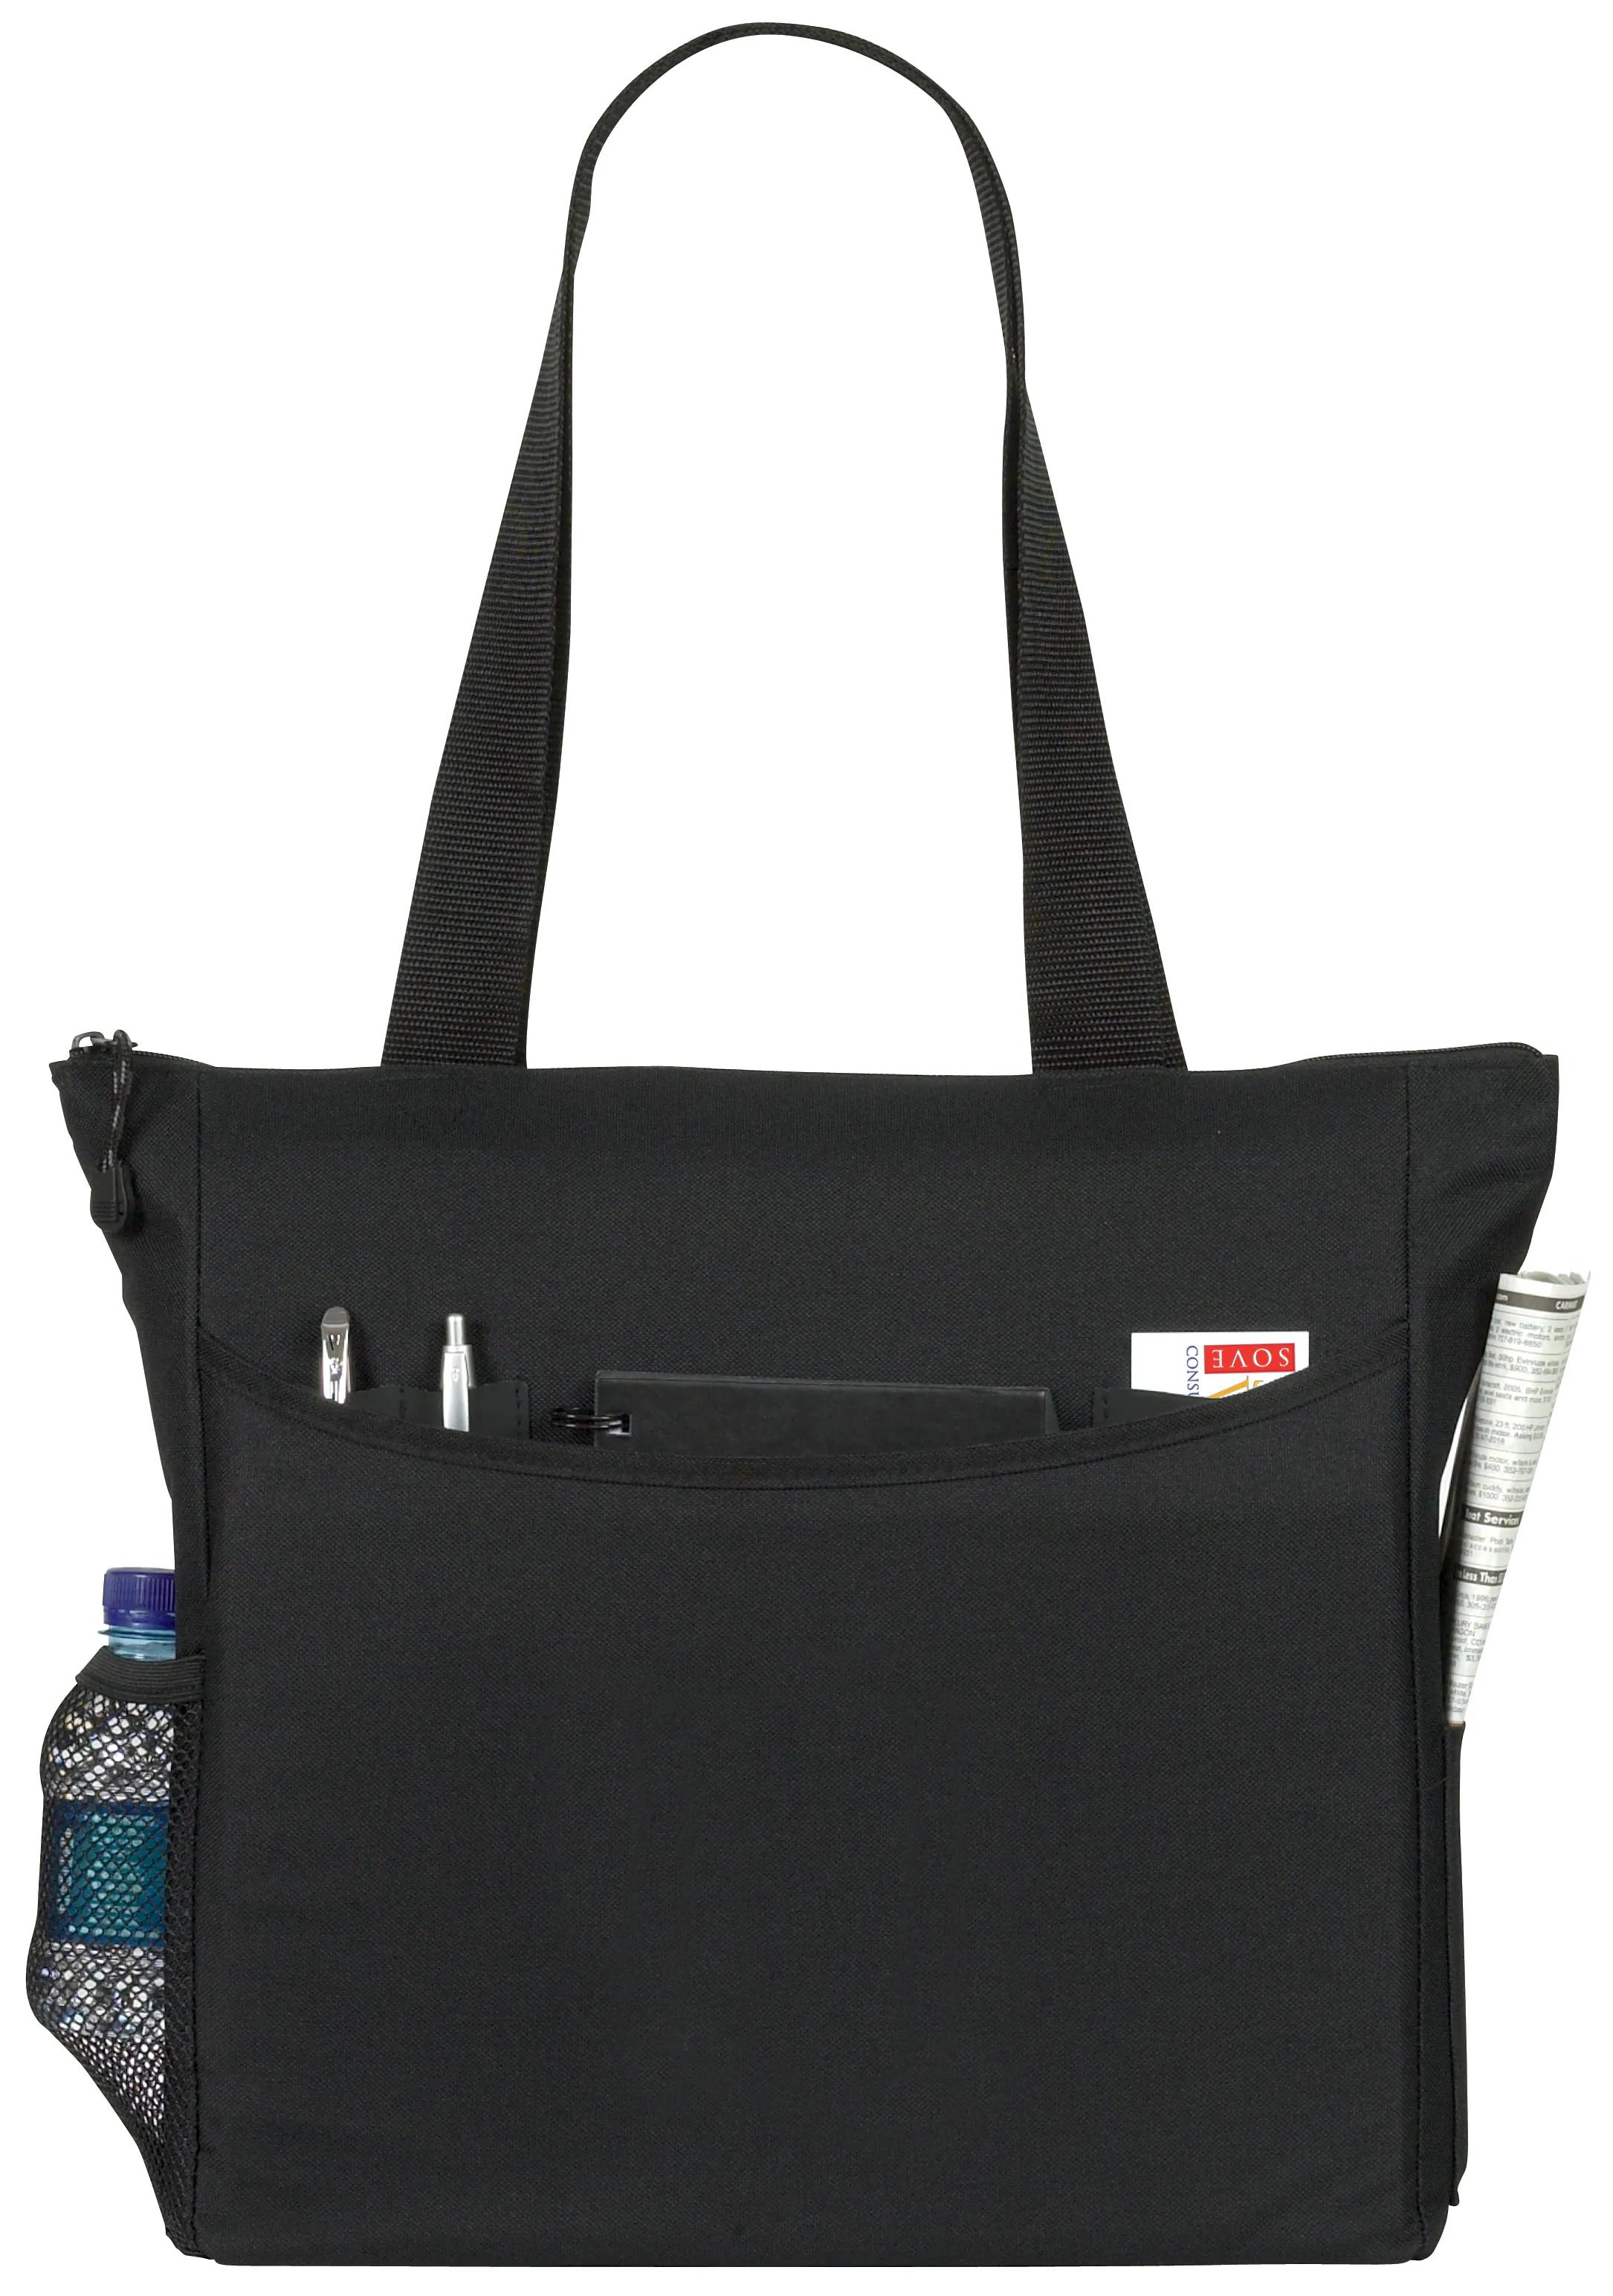 TranSport It Tote 7 of 40